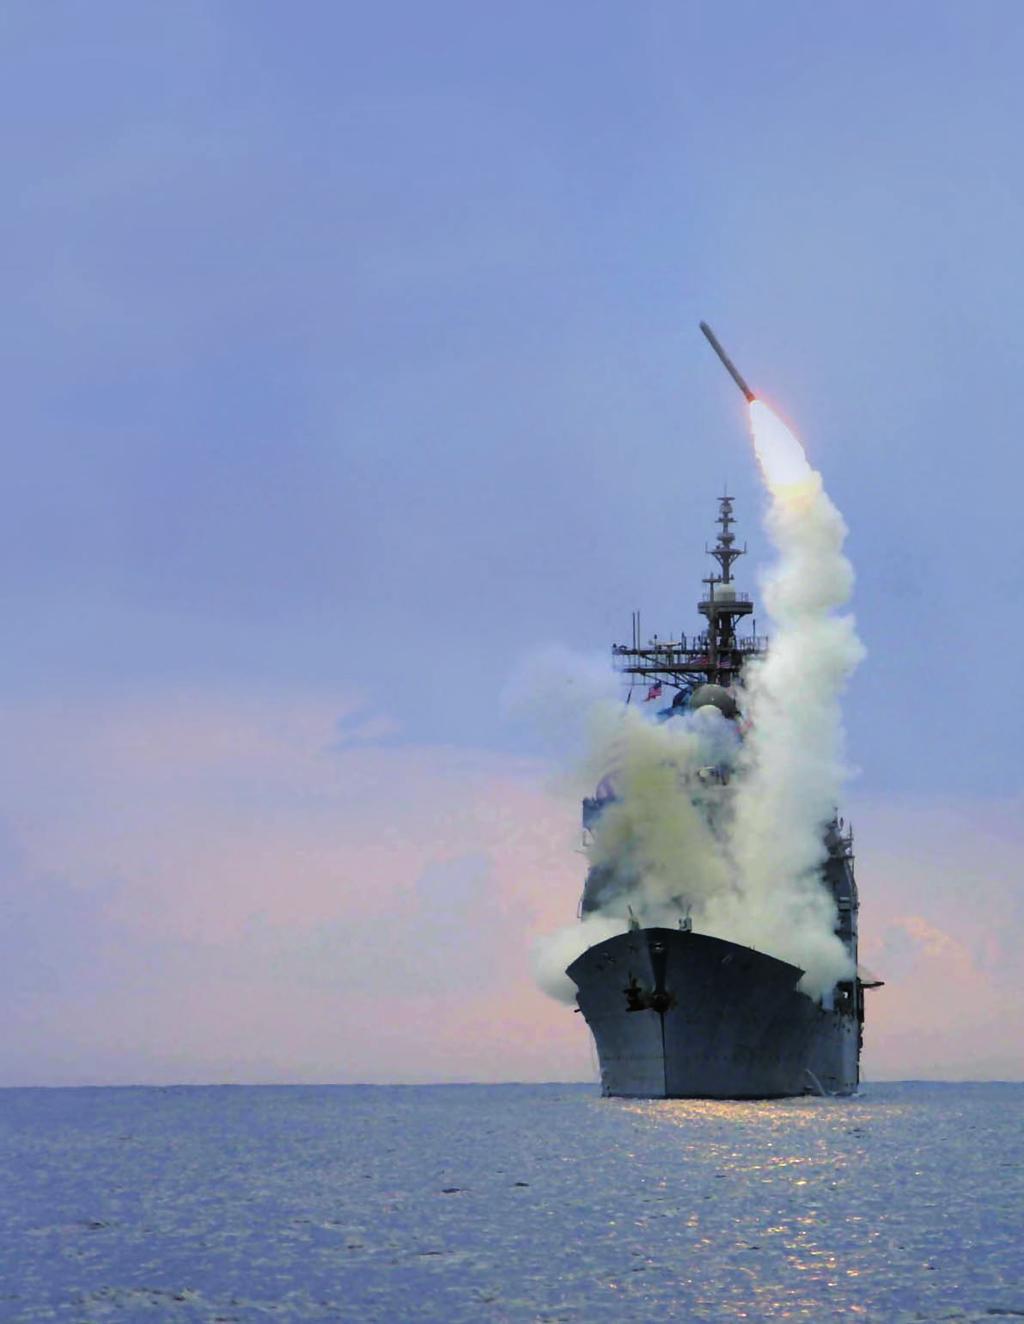 The Aegis combat system carried on naval surface combatants is being adapted for midcourse interception of ballistic missiles, and in some cases might be used for boost-phase interception too.